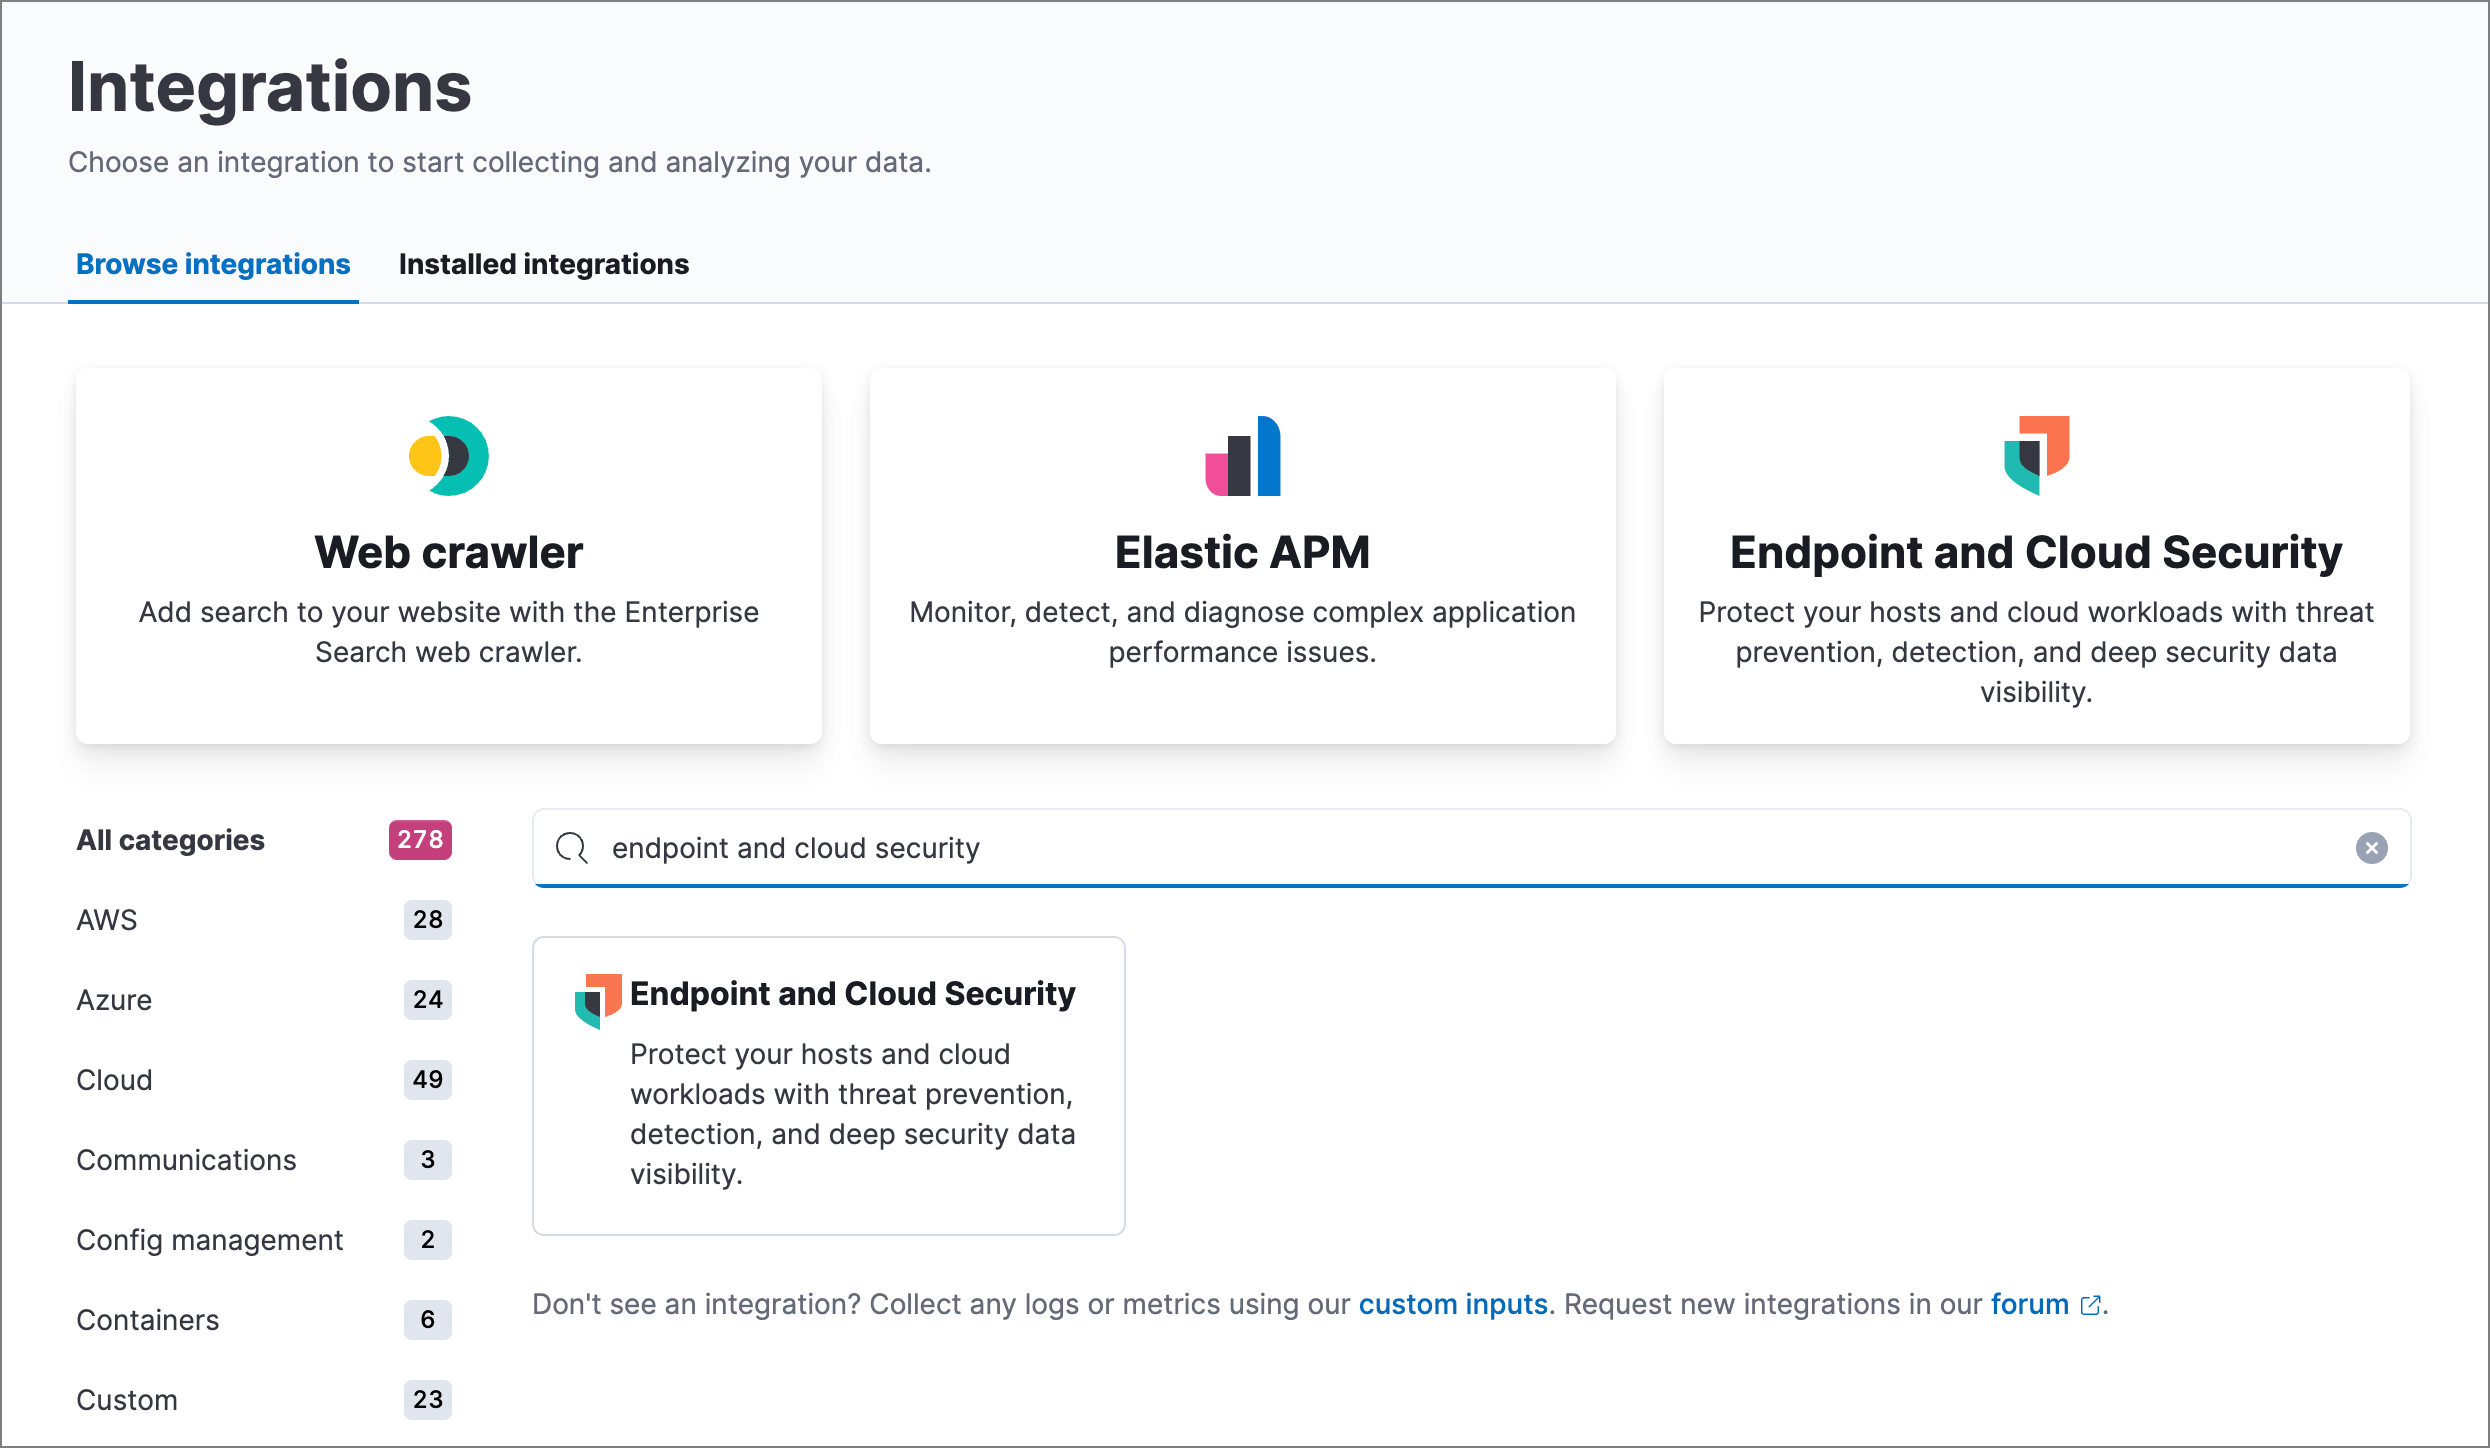 Search result for "Endpoint and Cloud Security" on the Integrations page.